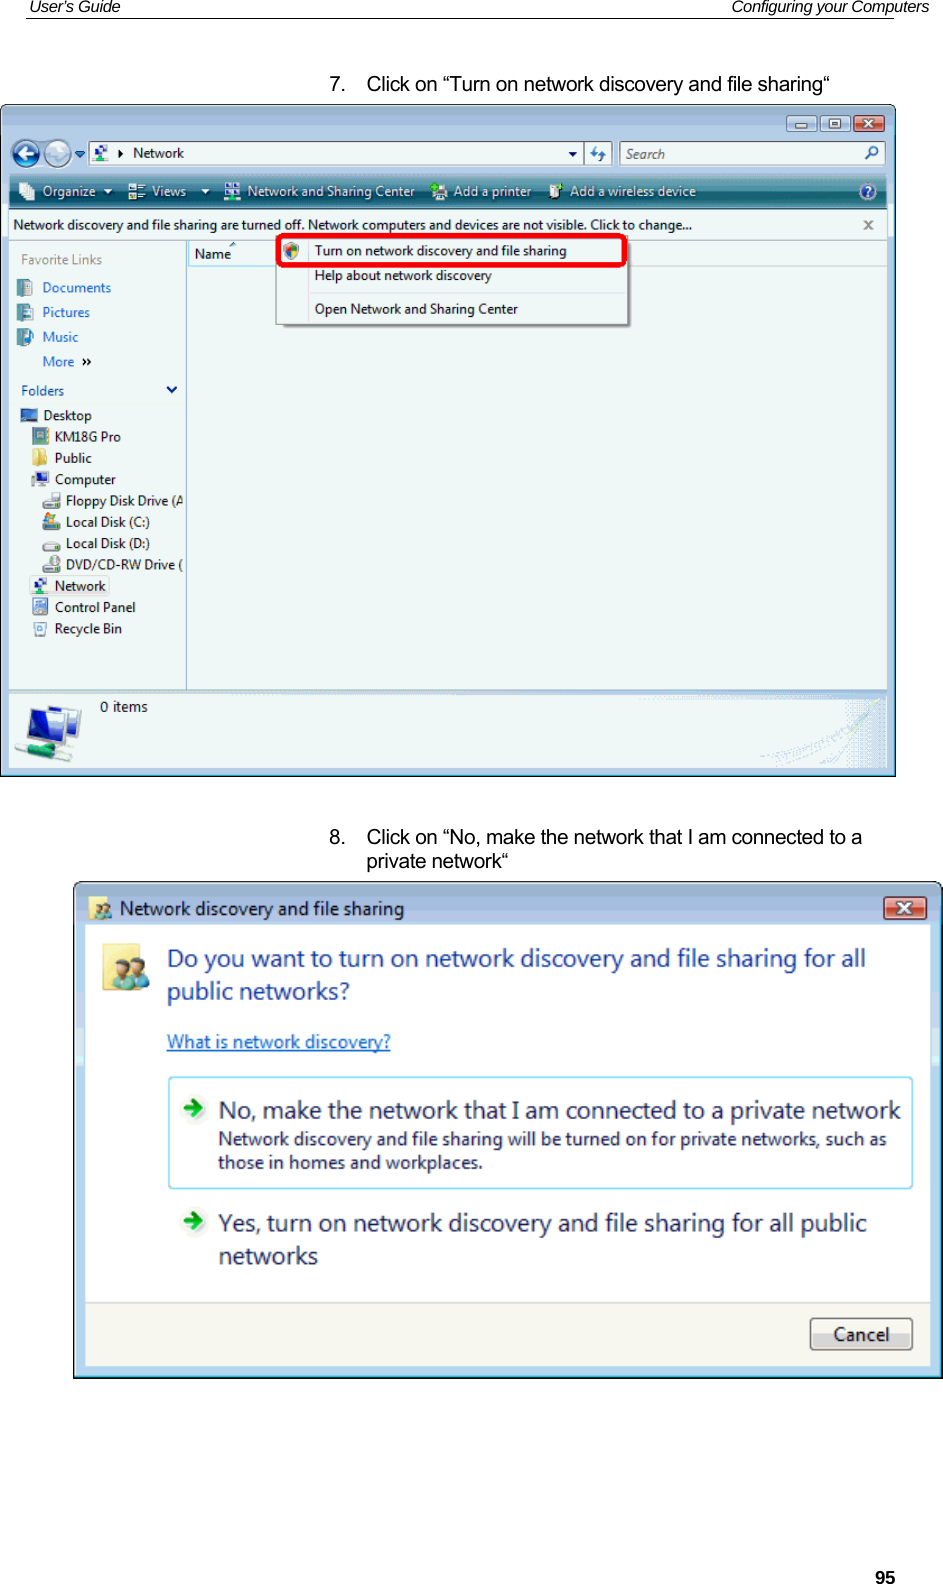 User’s Guide   Configuring your Computers 7.  Click on “Turn on network discovery and file sharing“   8.  Click on “No, make the network that I am connected to a private network“       95